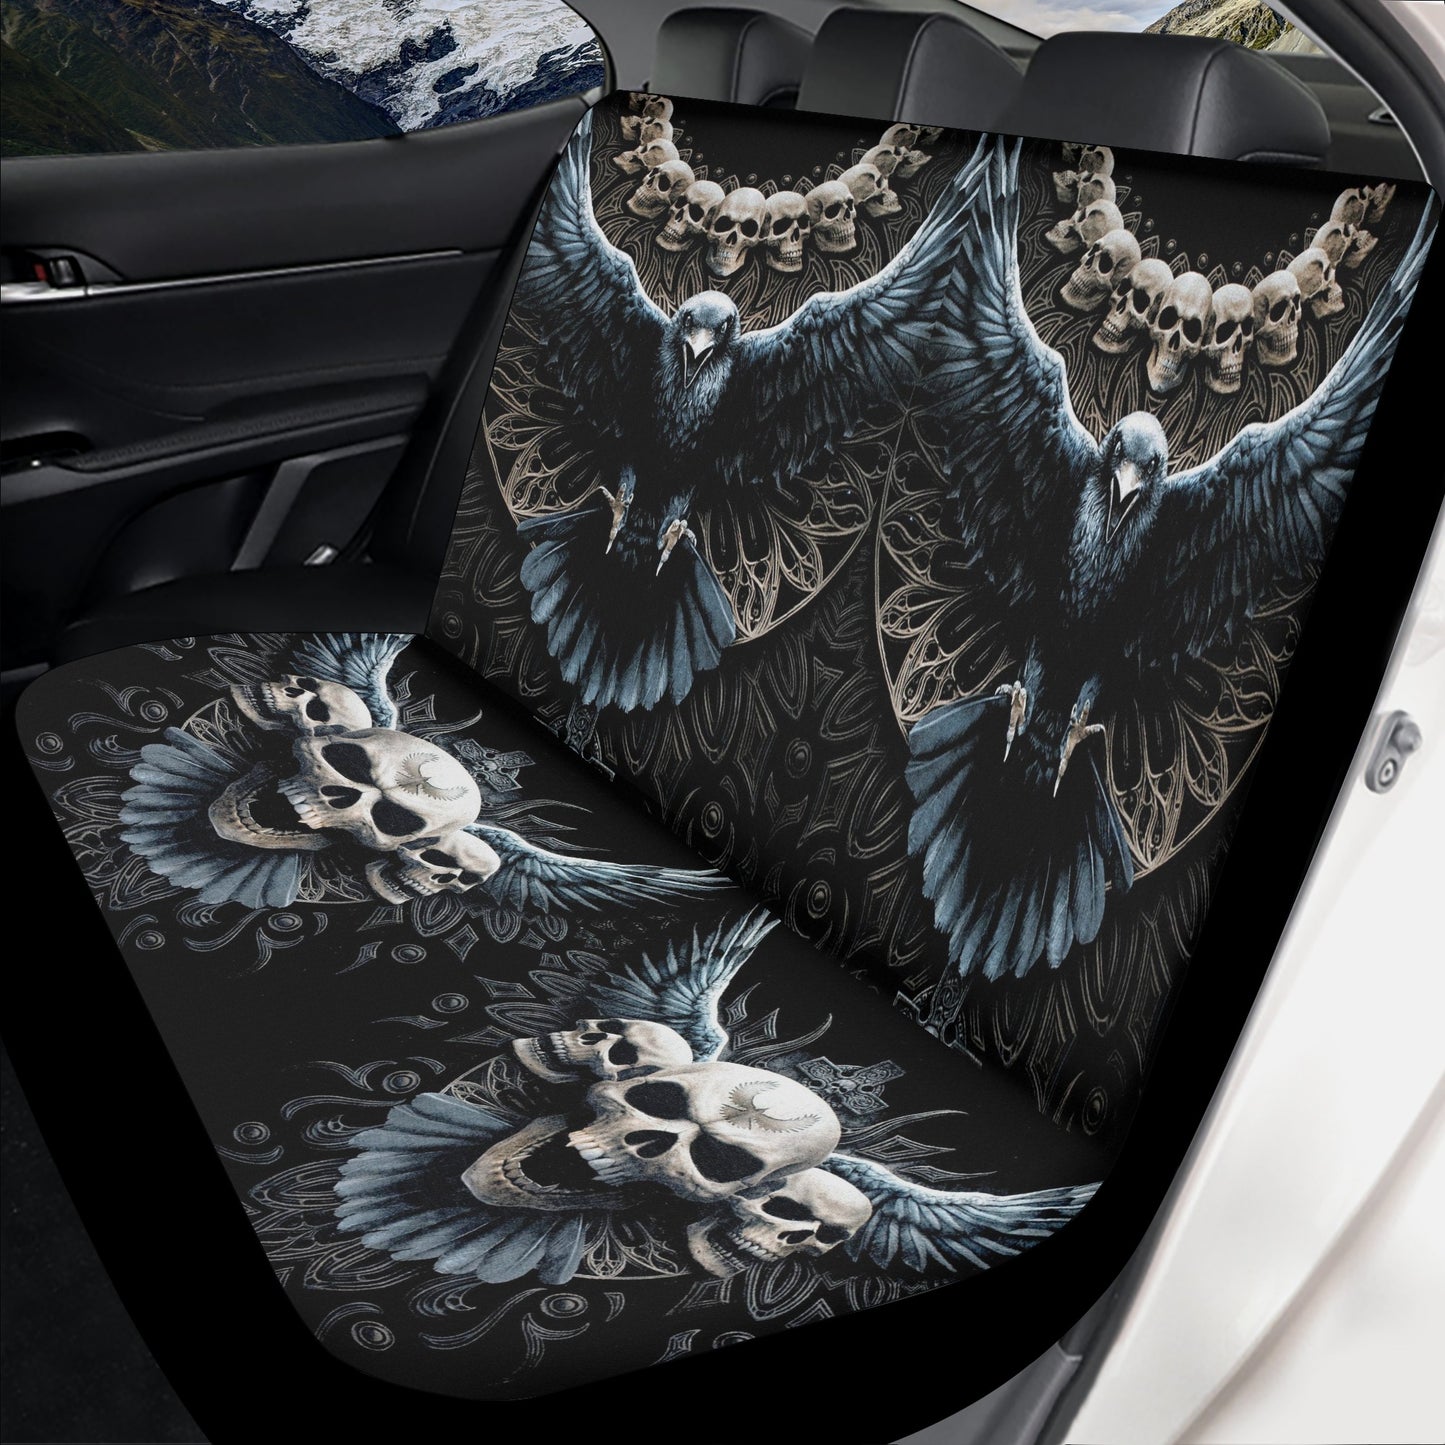 Punisher skull seat cover for truck, motorcycle skull seat cover for car, biker skull car protector, motorcycle skull car floor mat, death s